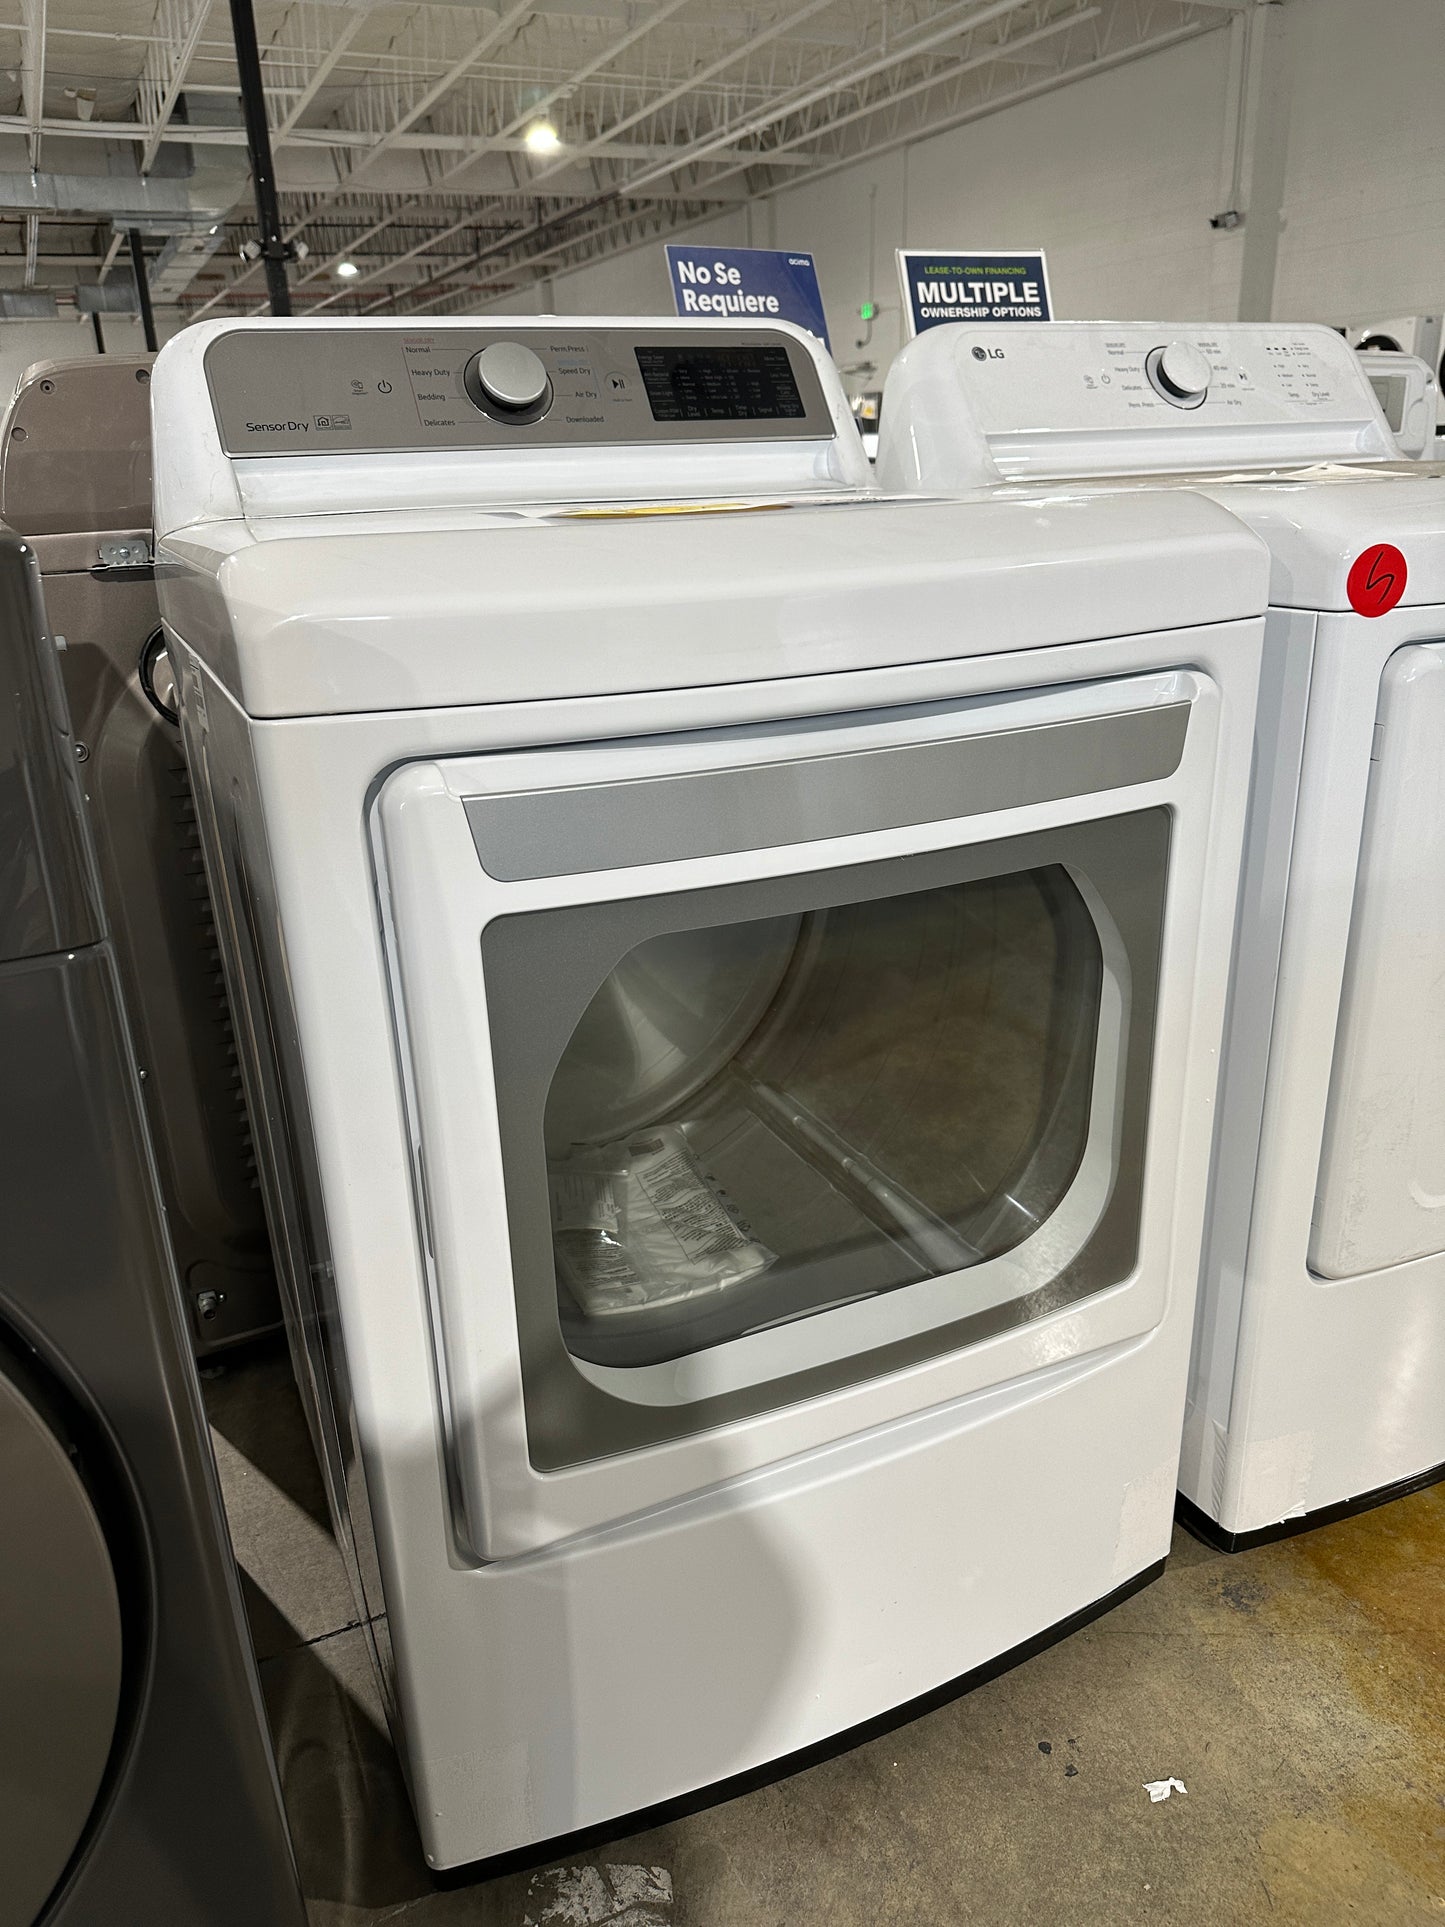 Smart Electric Dryer with EasyLoad Door - White  MODEL: DLE7400WE  DRY11907S